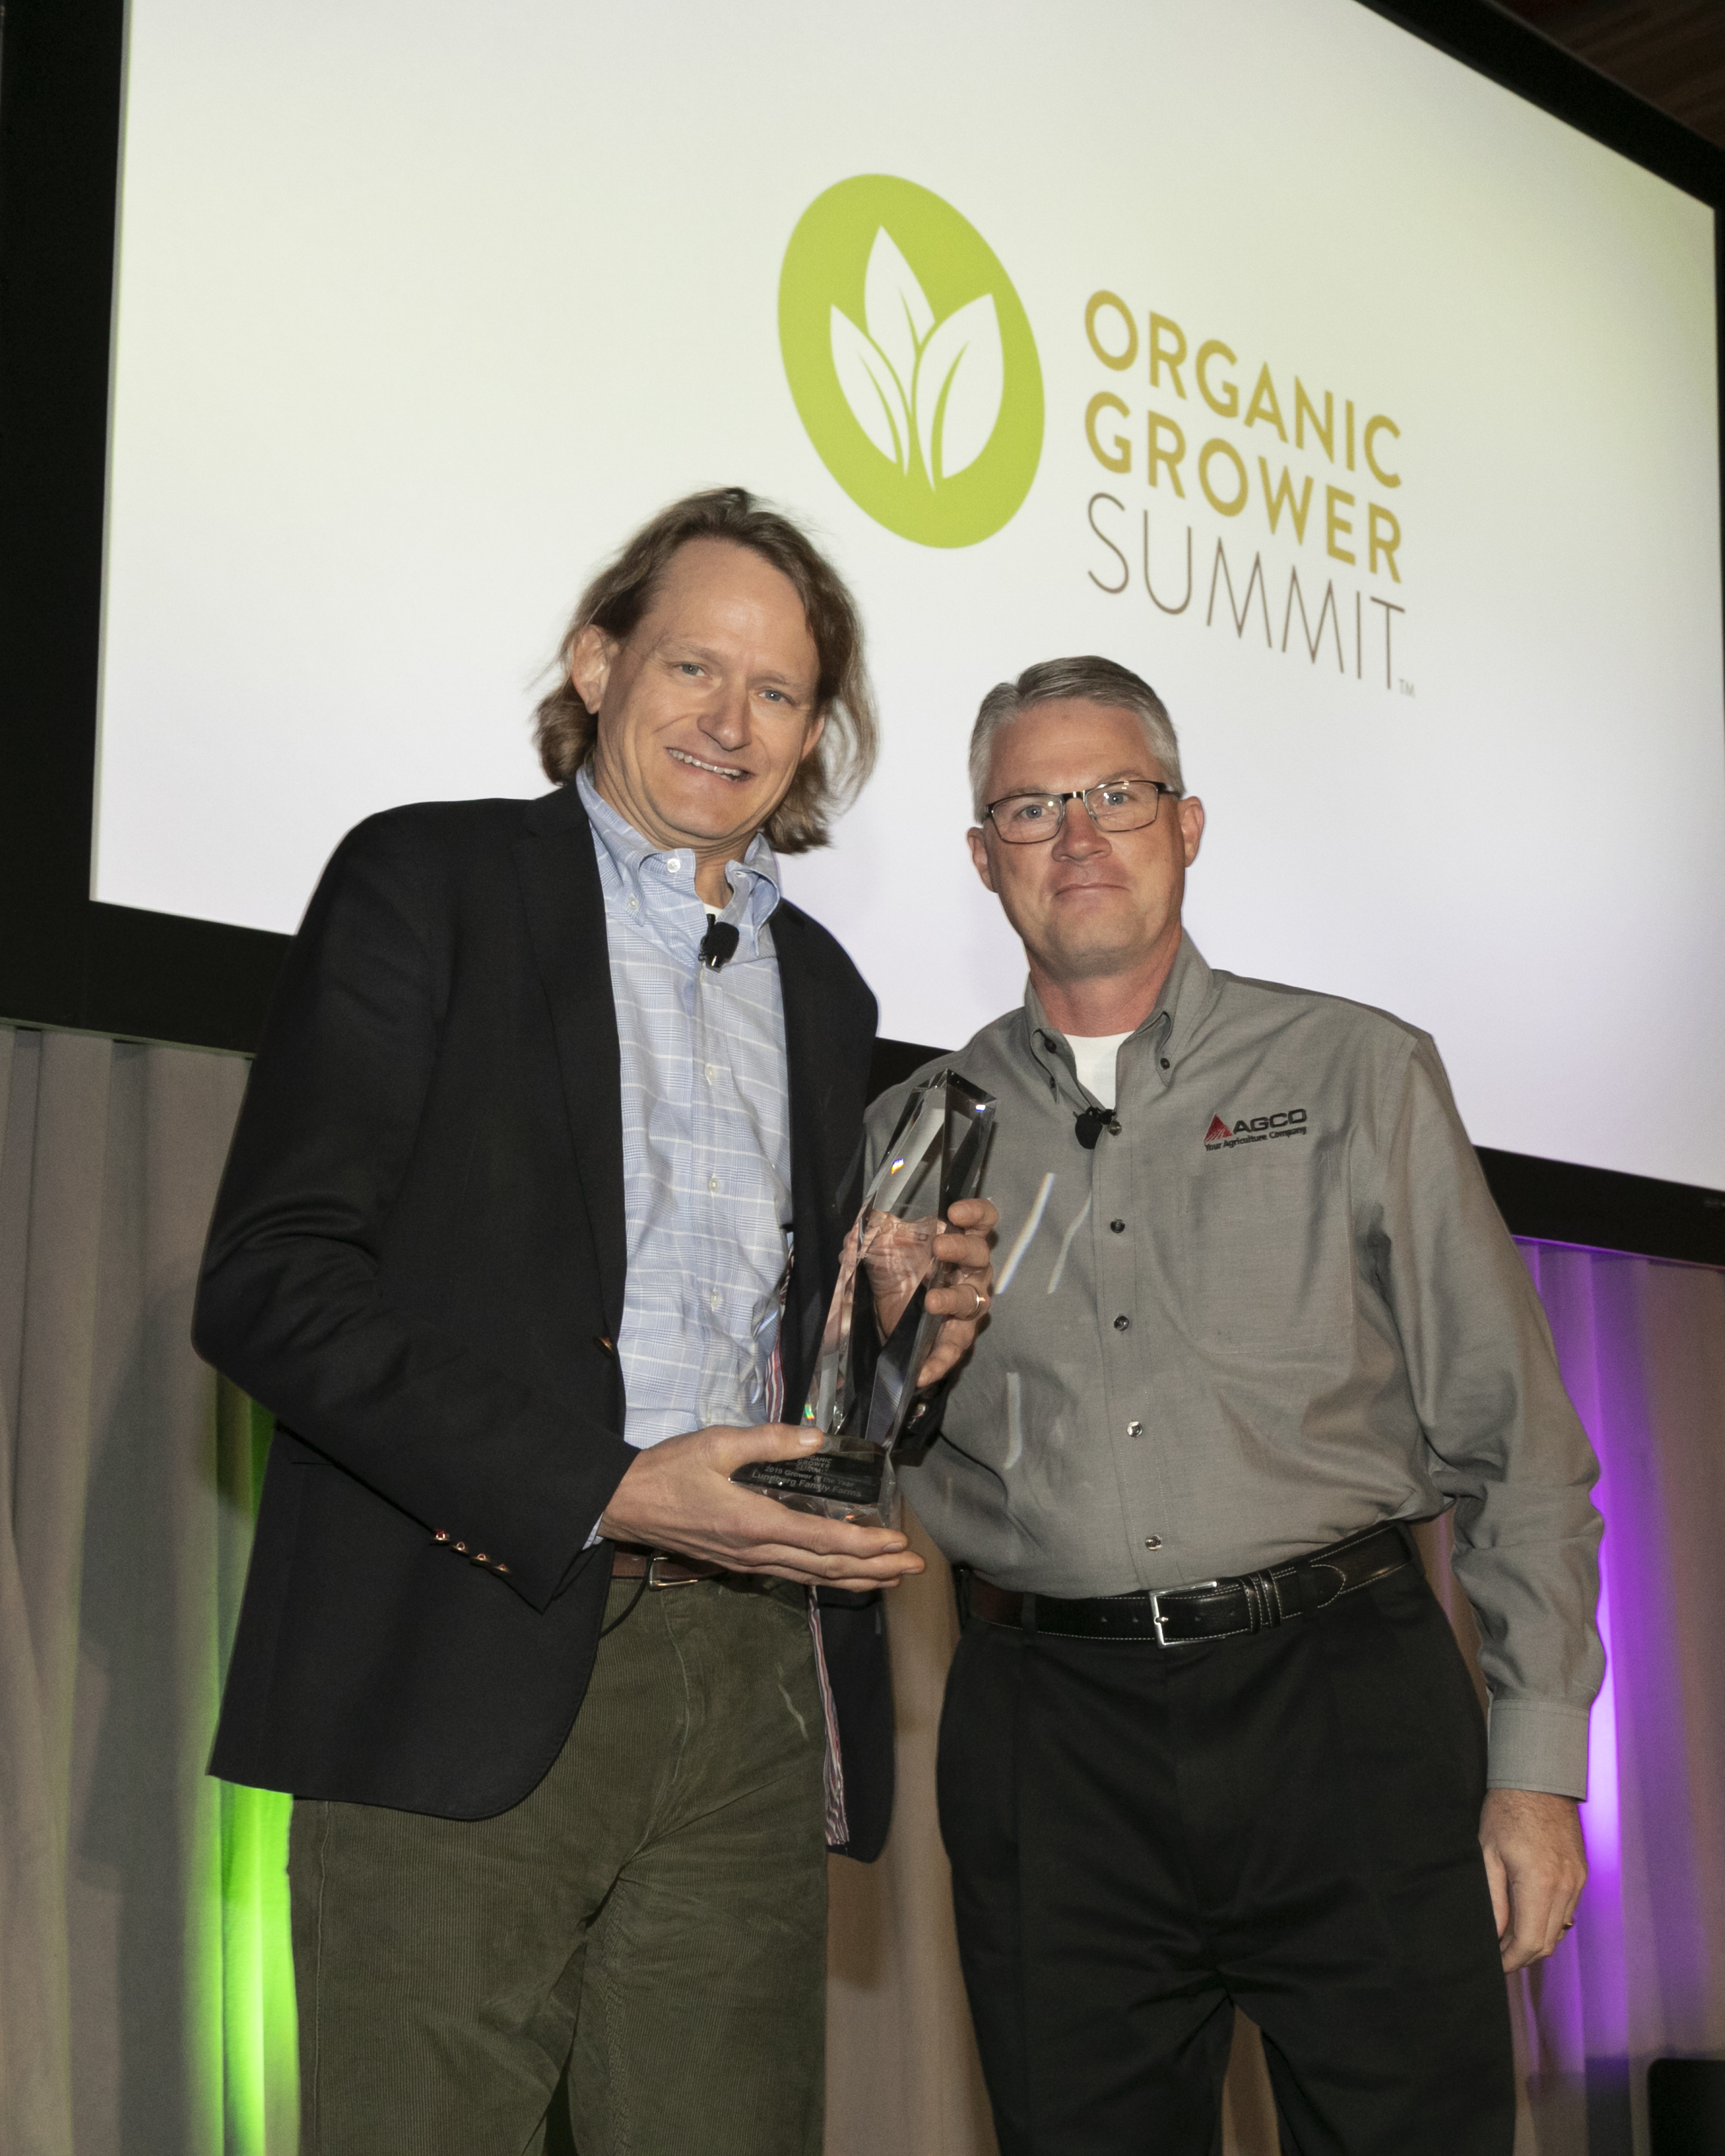 Lundberg Family Farms CEO Grant Lundberg (left) on December 5, 2019, accepting the Organic Grower Summit’s Grower of the Year award in Monterey, California.